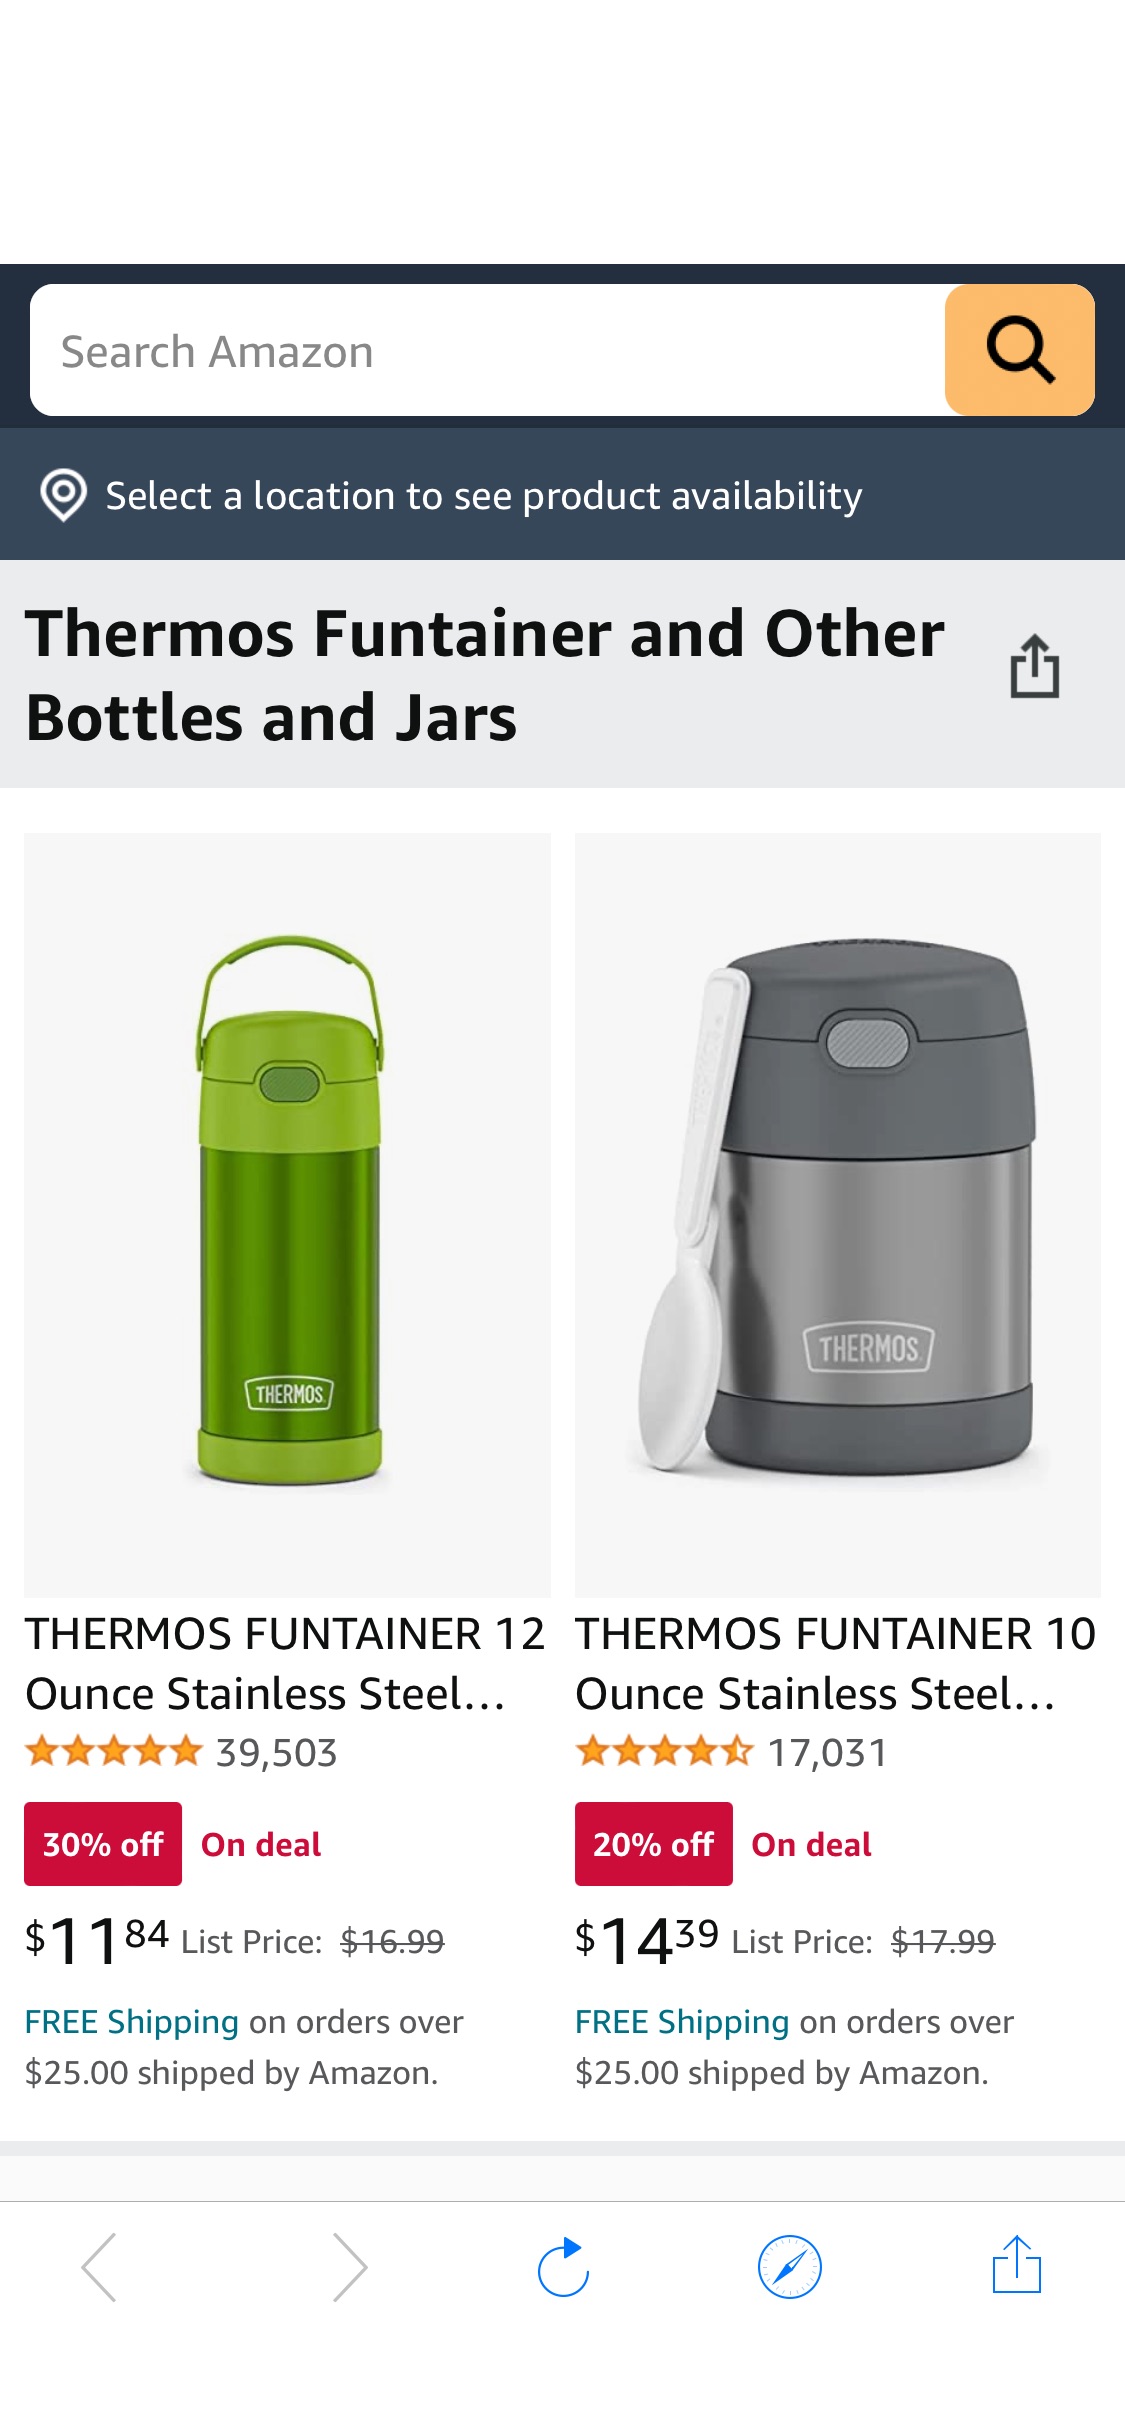 Thermos Funtainer and Other Bottles and Jars